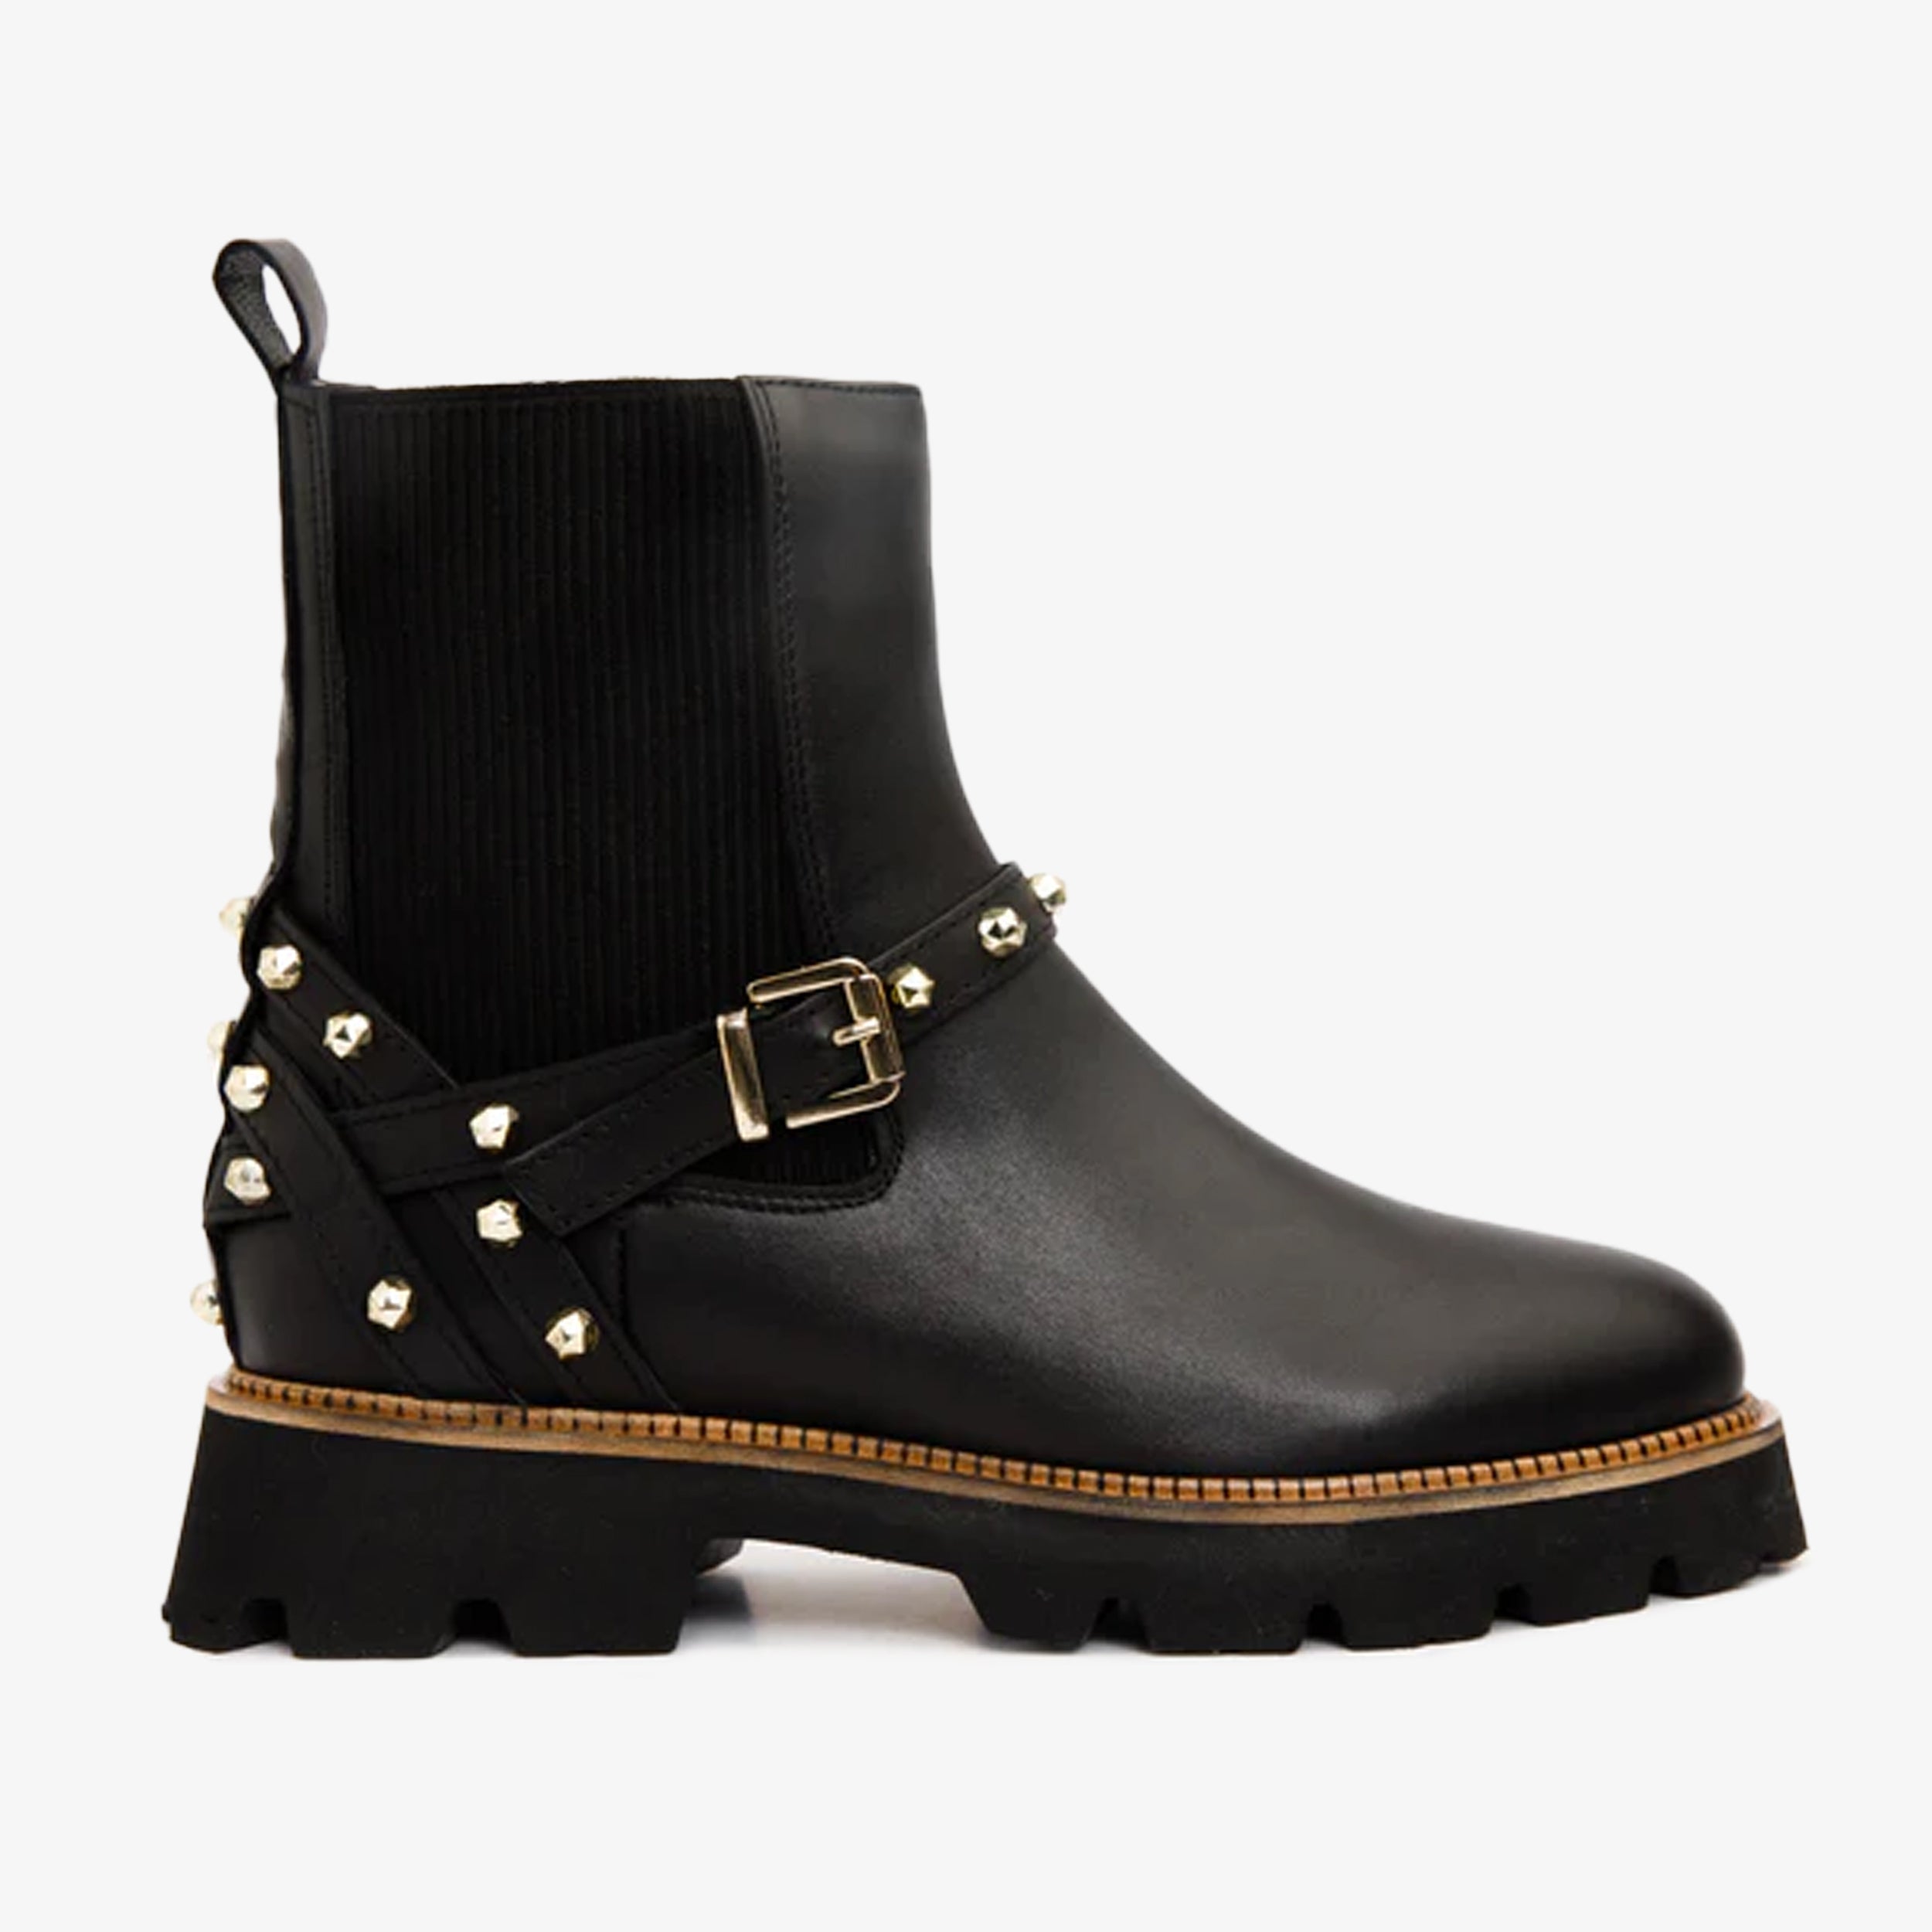 The Rabah Black Leather Women Boot